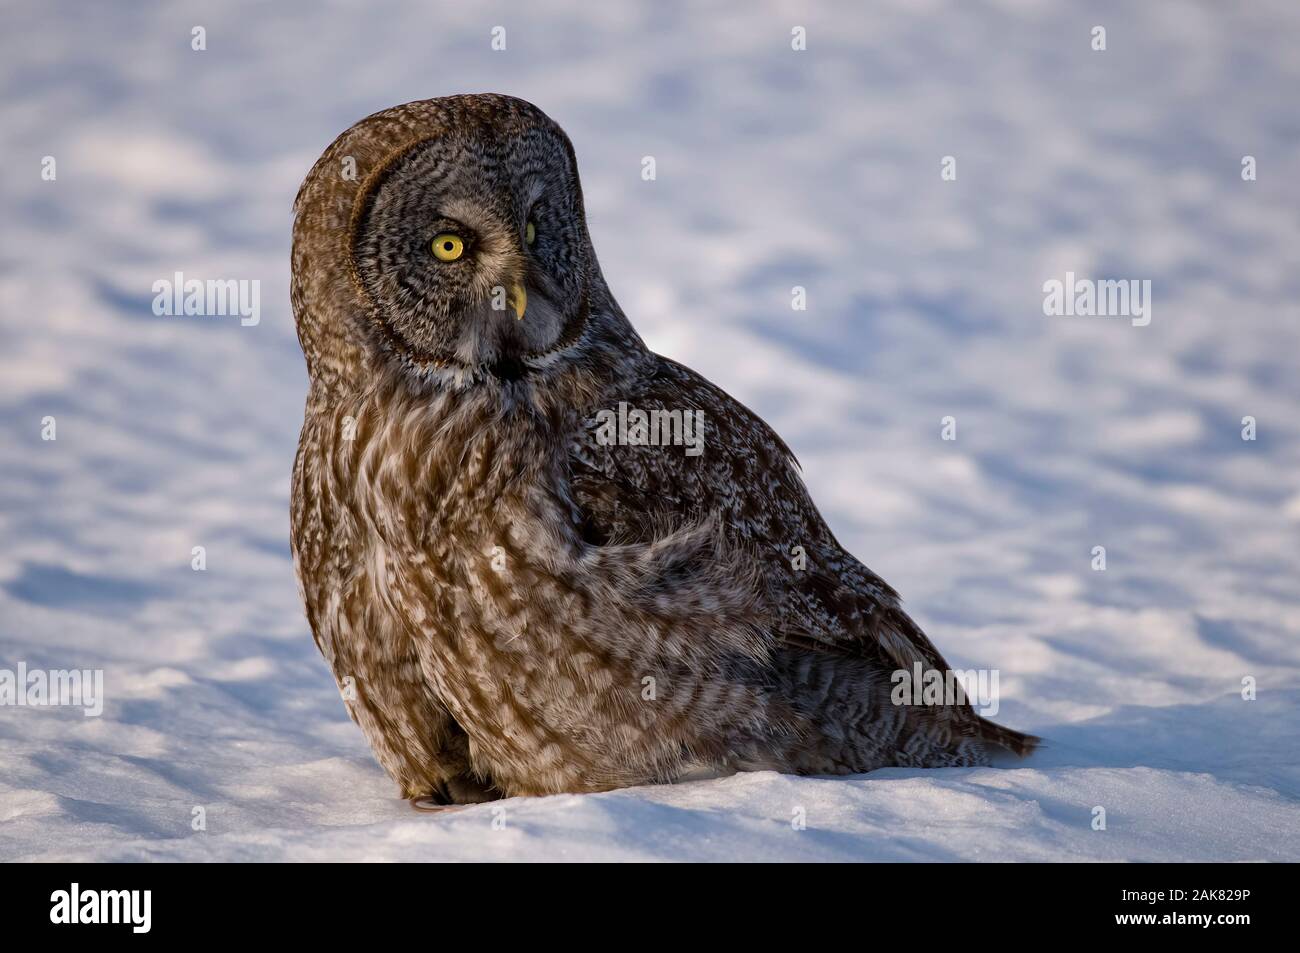 Great Gray Owl standing on snow. Stock Photo